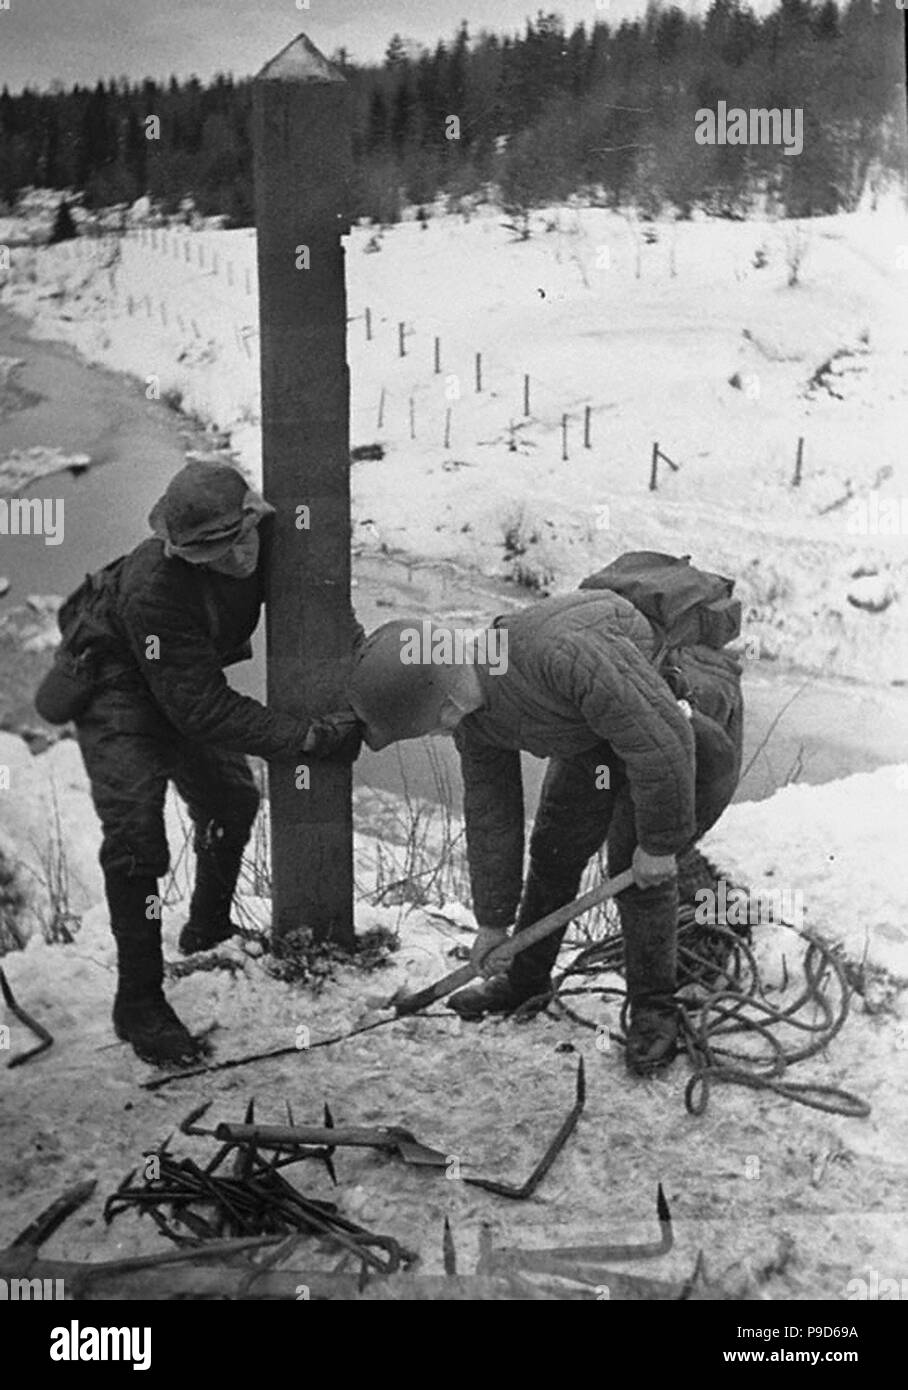 Red Army soldiers removed the border post in Karelia. The Winter War. 1939. Museum: Russian State Film and Photo Archive, Krasnogorsk. Stock Photo